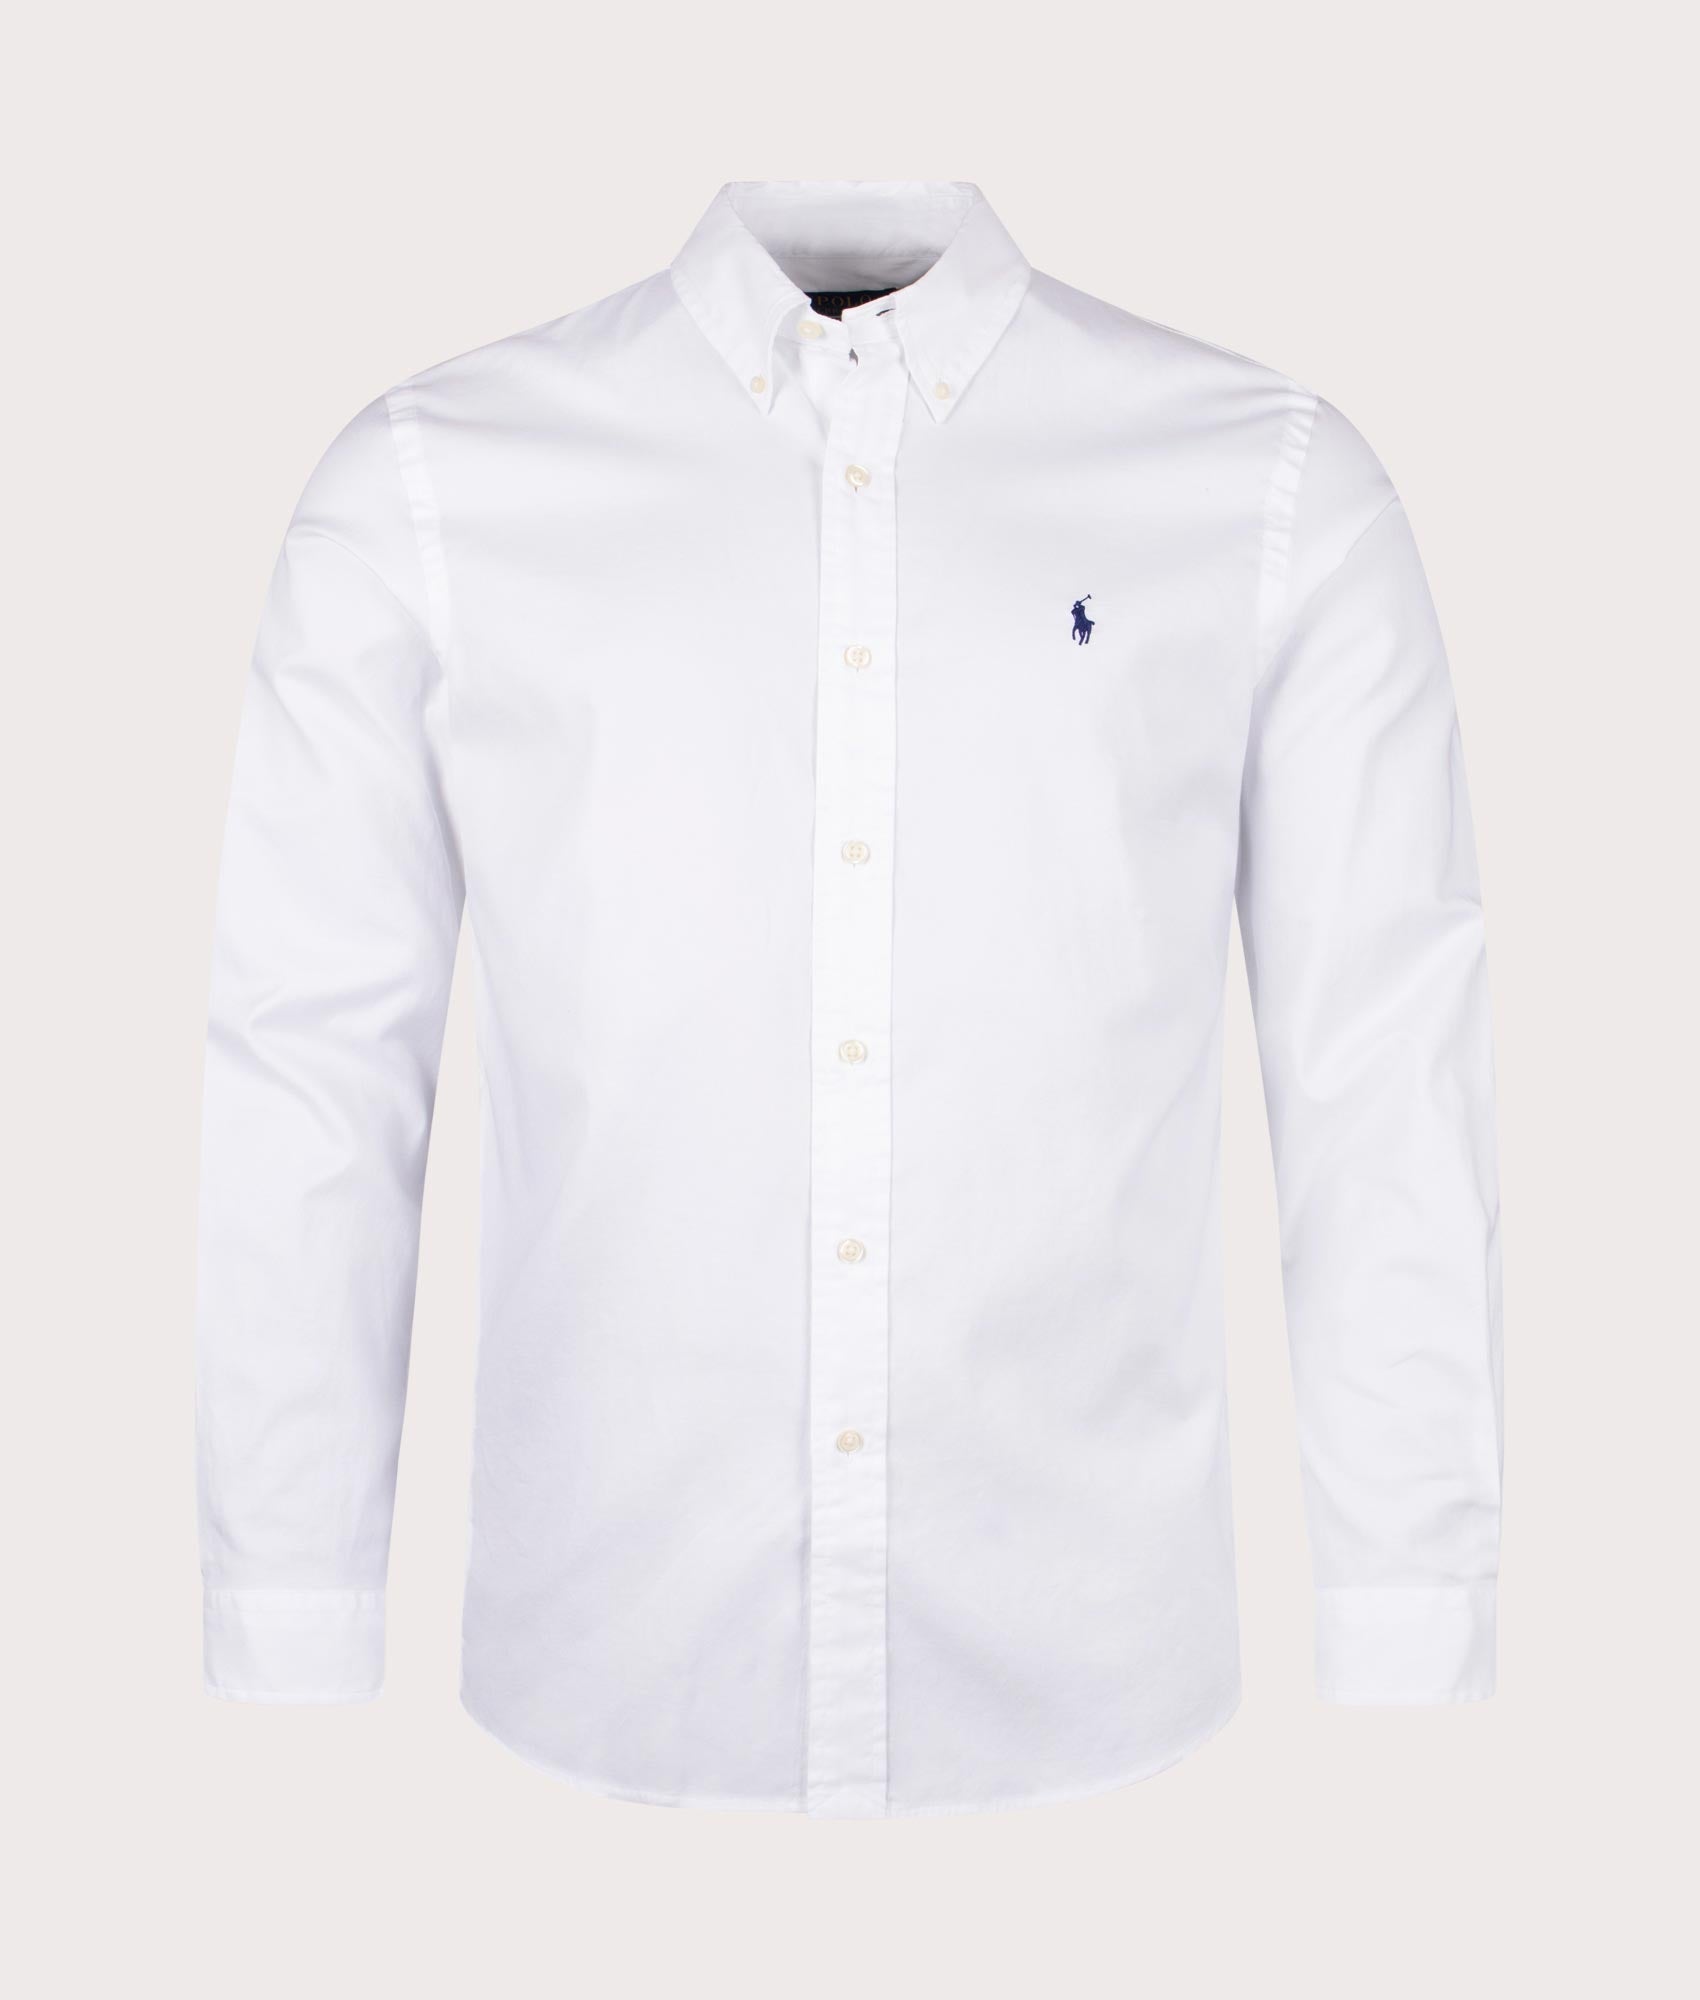 Polo Ralph Lauren Mens Custom Fit Stretch Oxford Shirt - Colour: 002 White - Size: Small